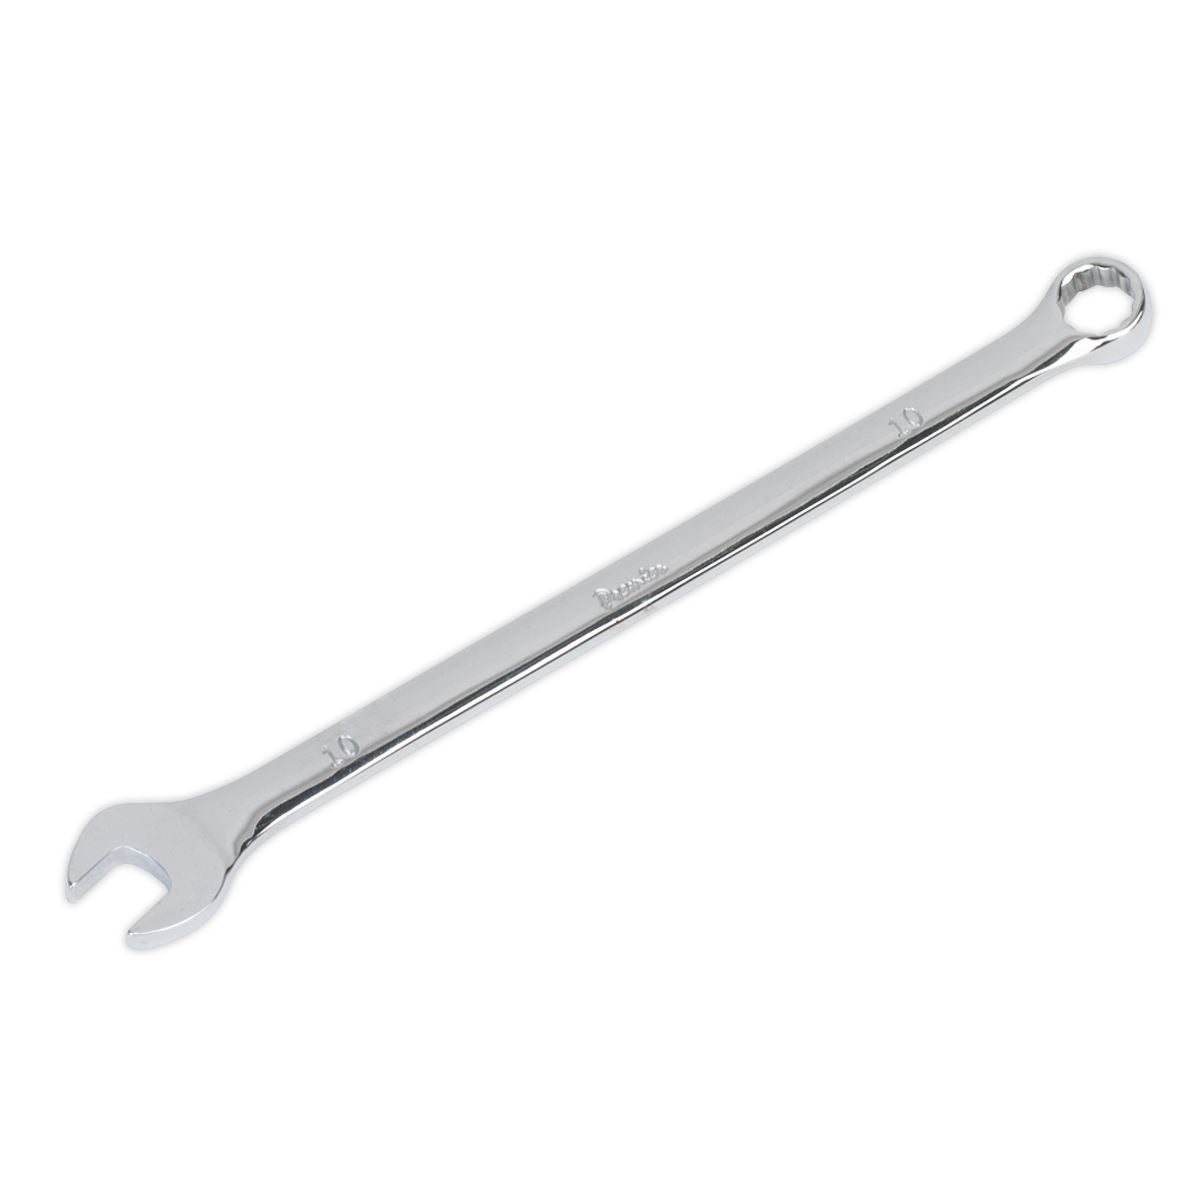 Sealey Combination Spanner Extra-Long 10mm Premier WallDrive Wrench Garage Tool